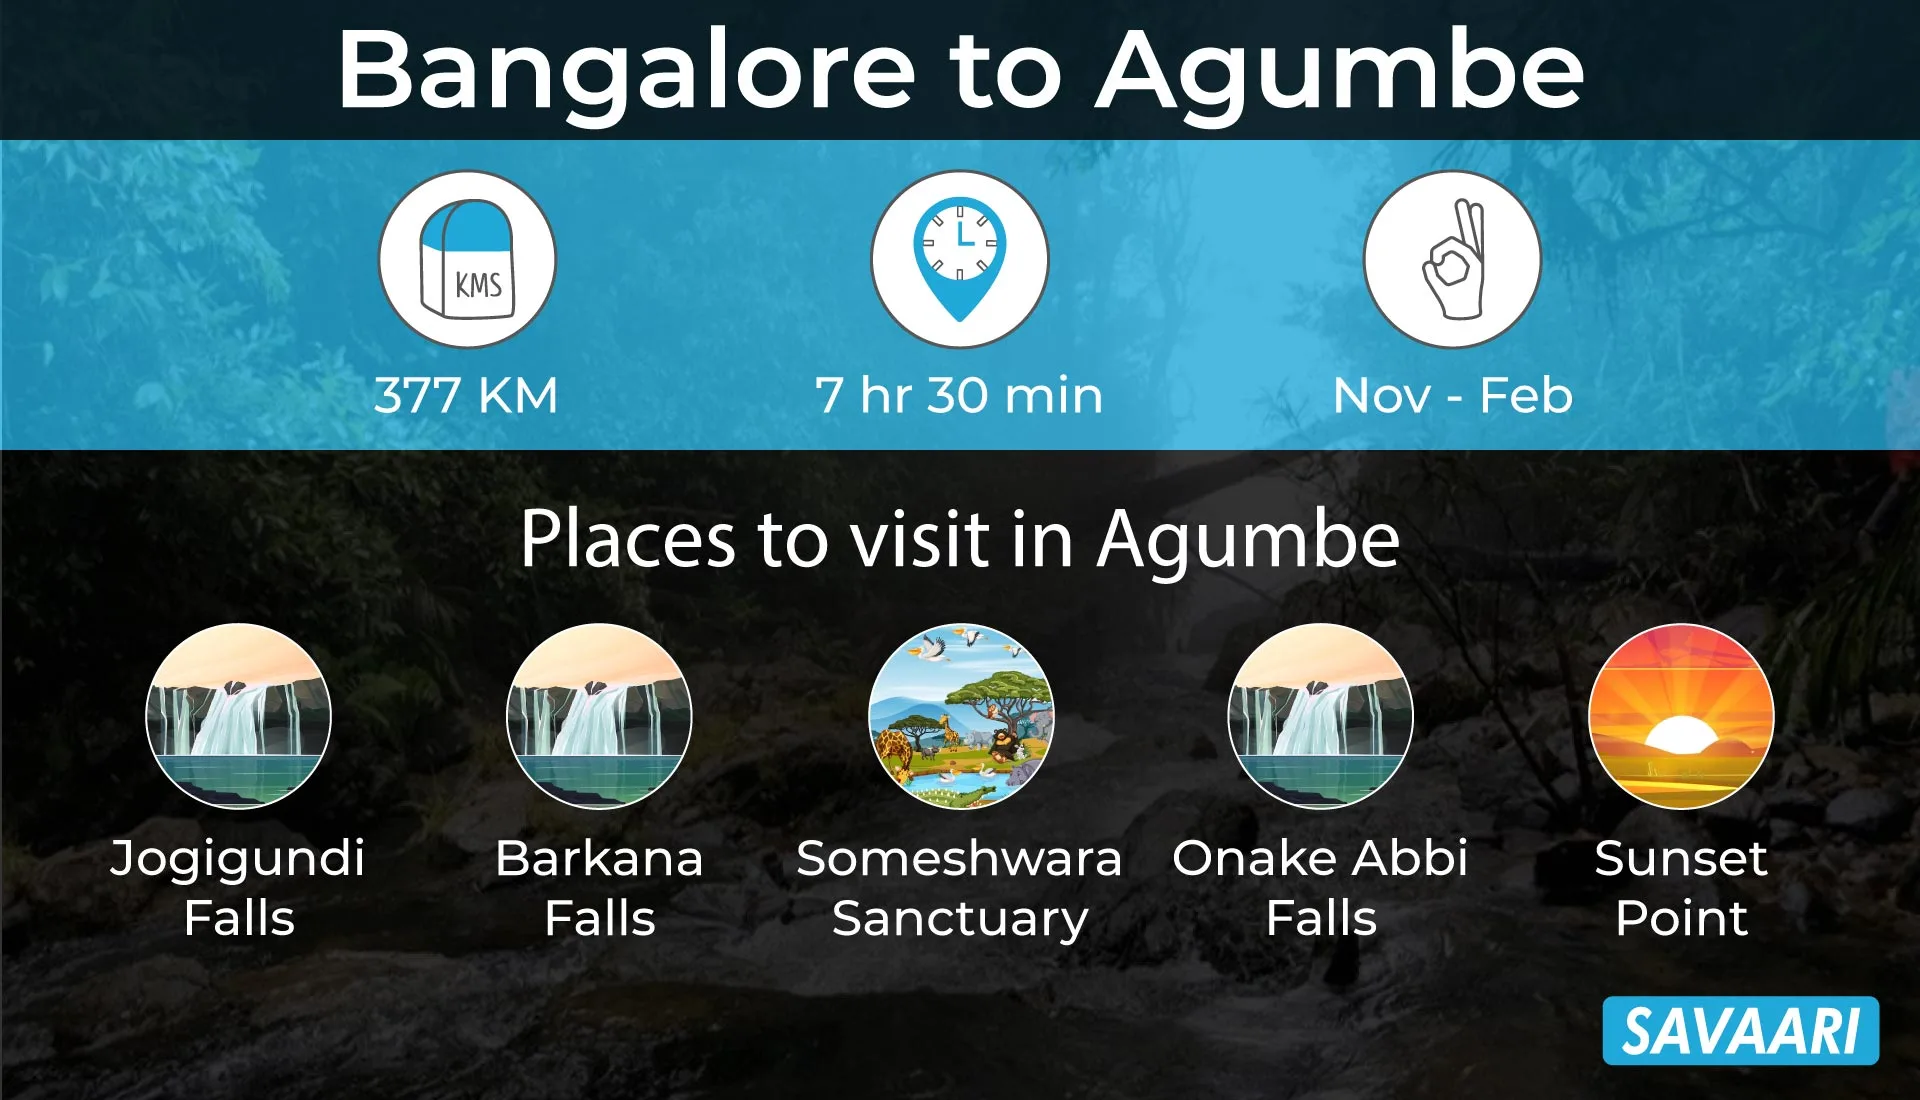 Bangalore to Agumbe a scenic road trip